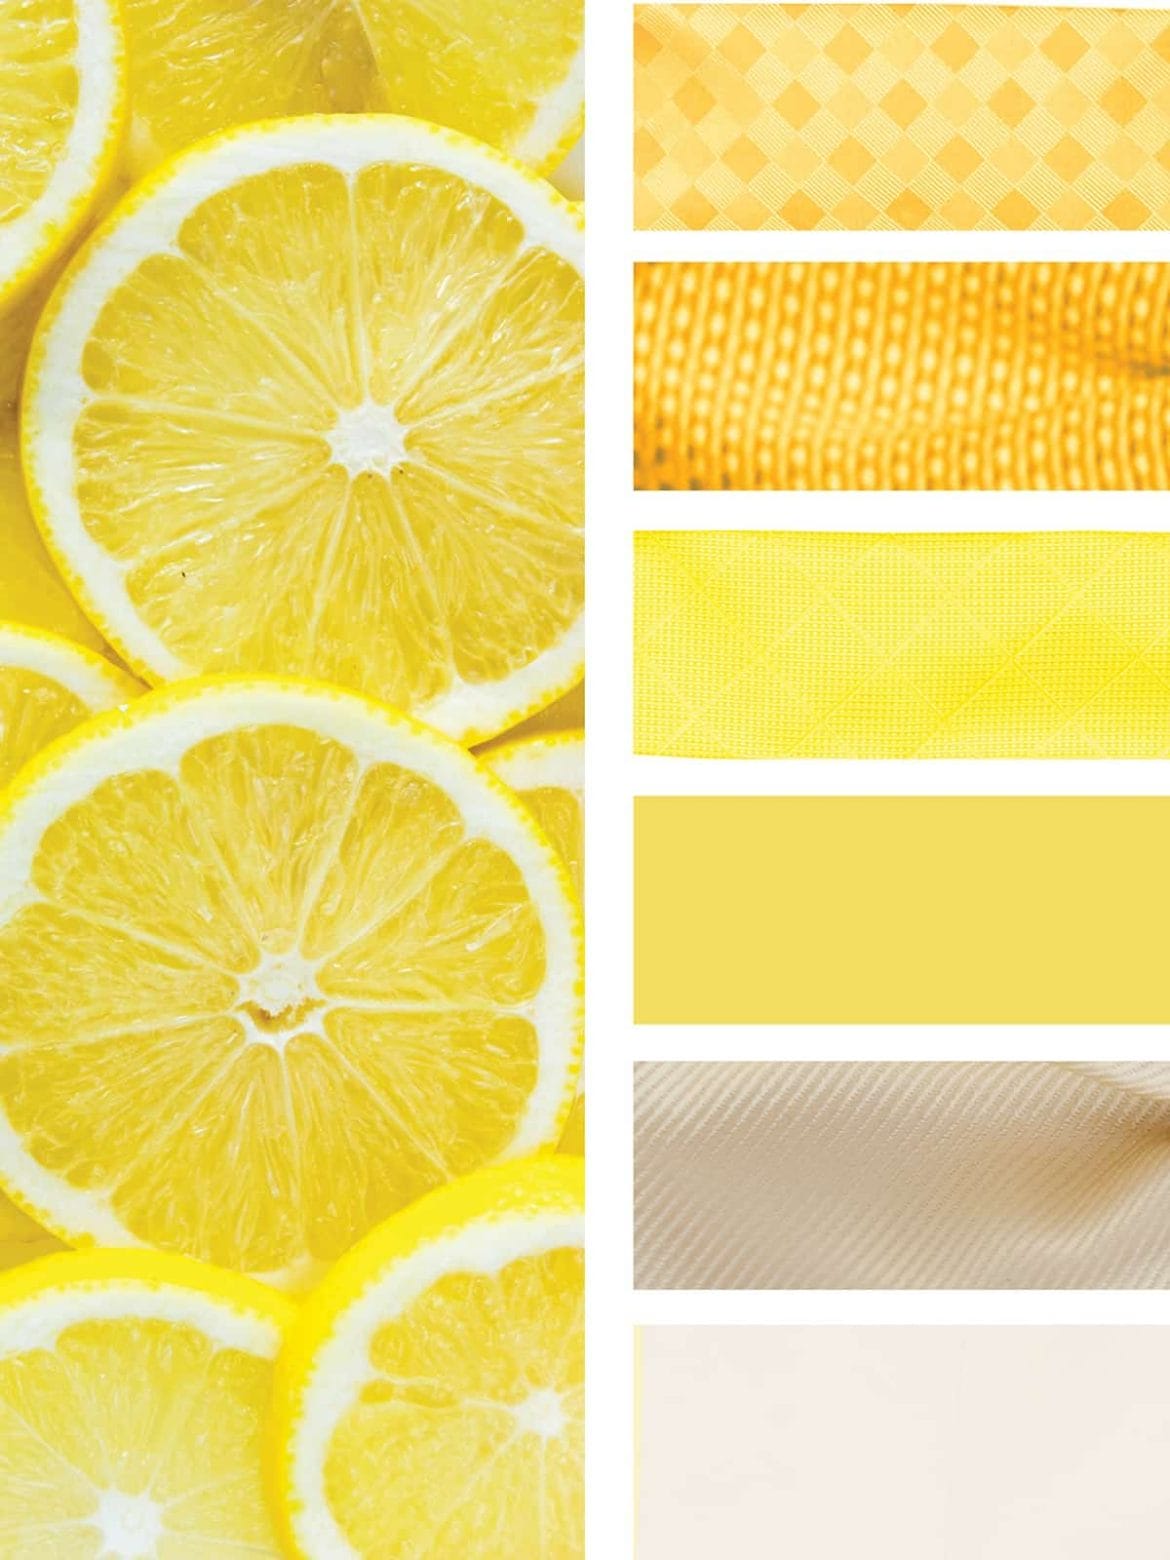 A vibrant collage of lemon slices and yellow fabric, perfect for a summer picnic or citrus-themed event.